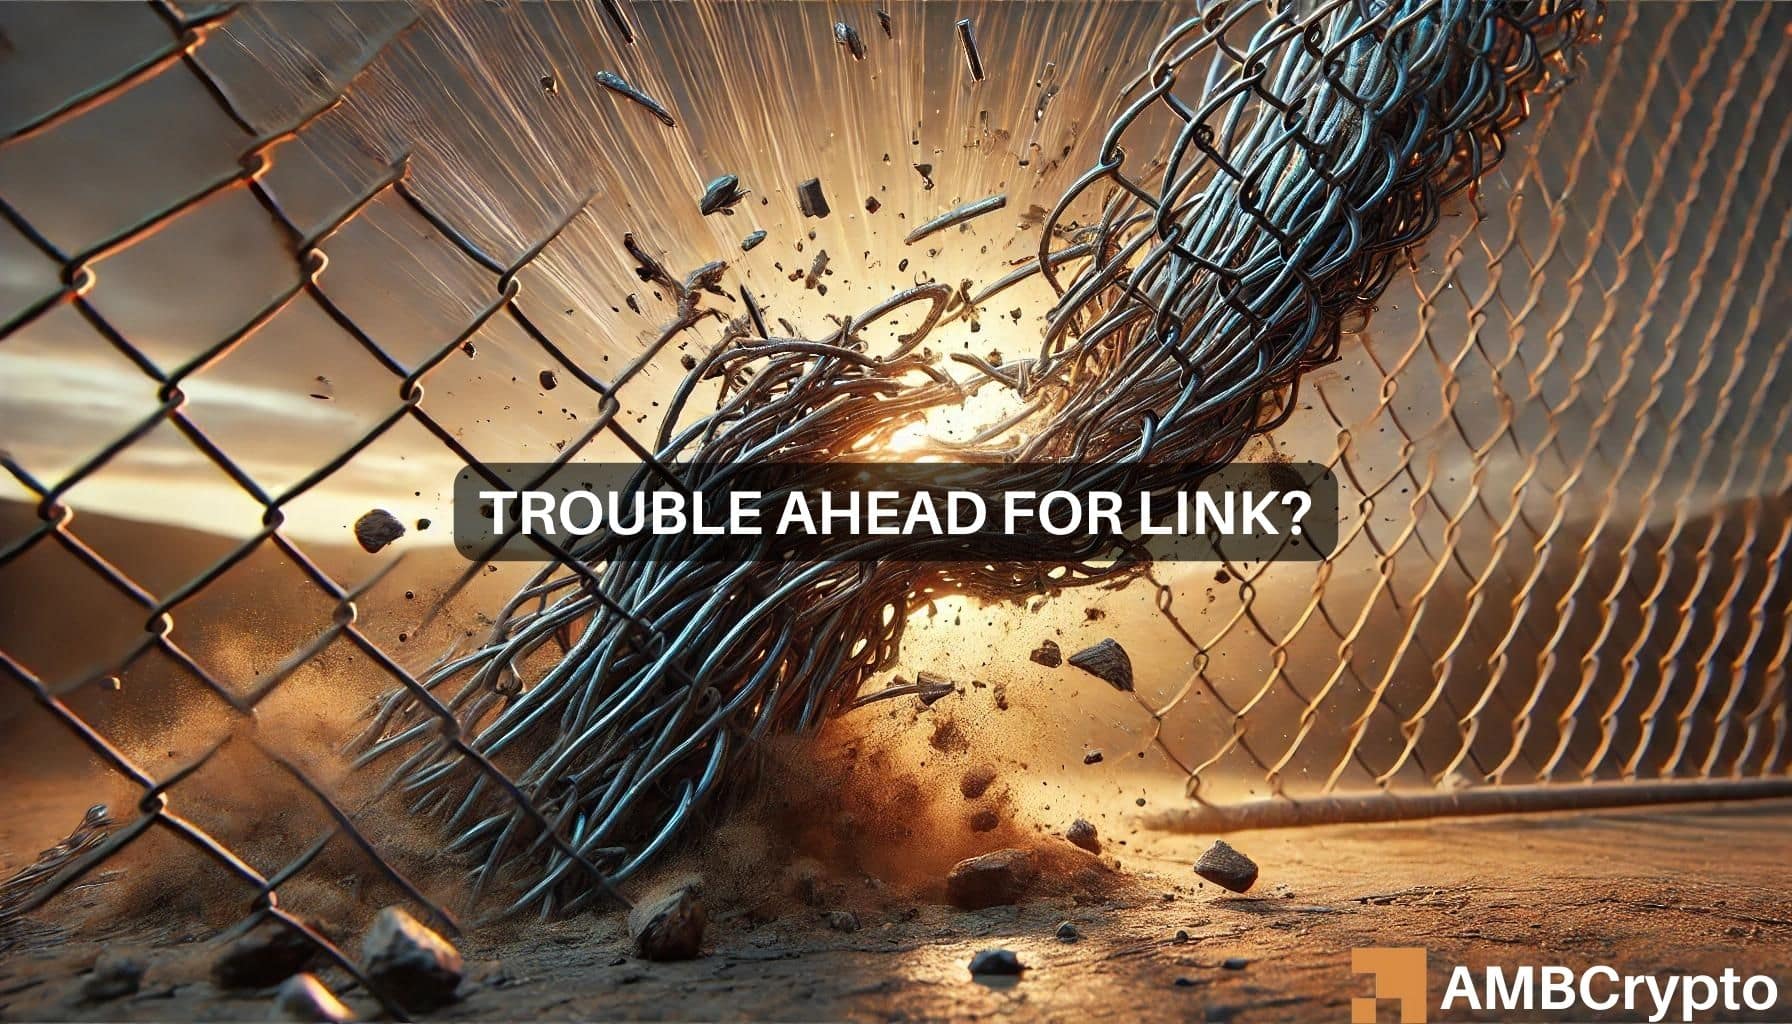 Chainlink crashes through support: More pain ahead for LINK investors?